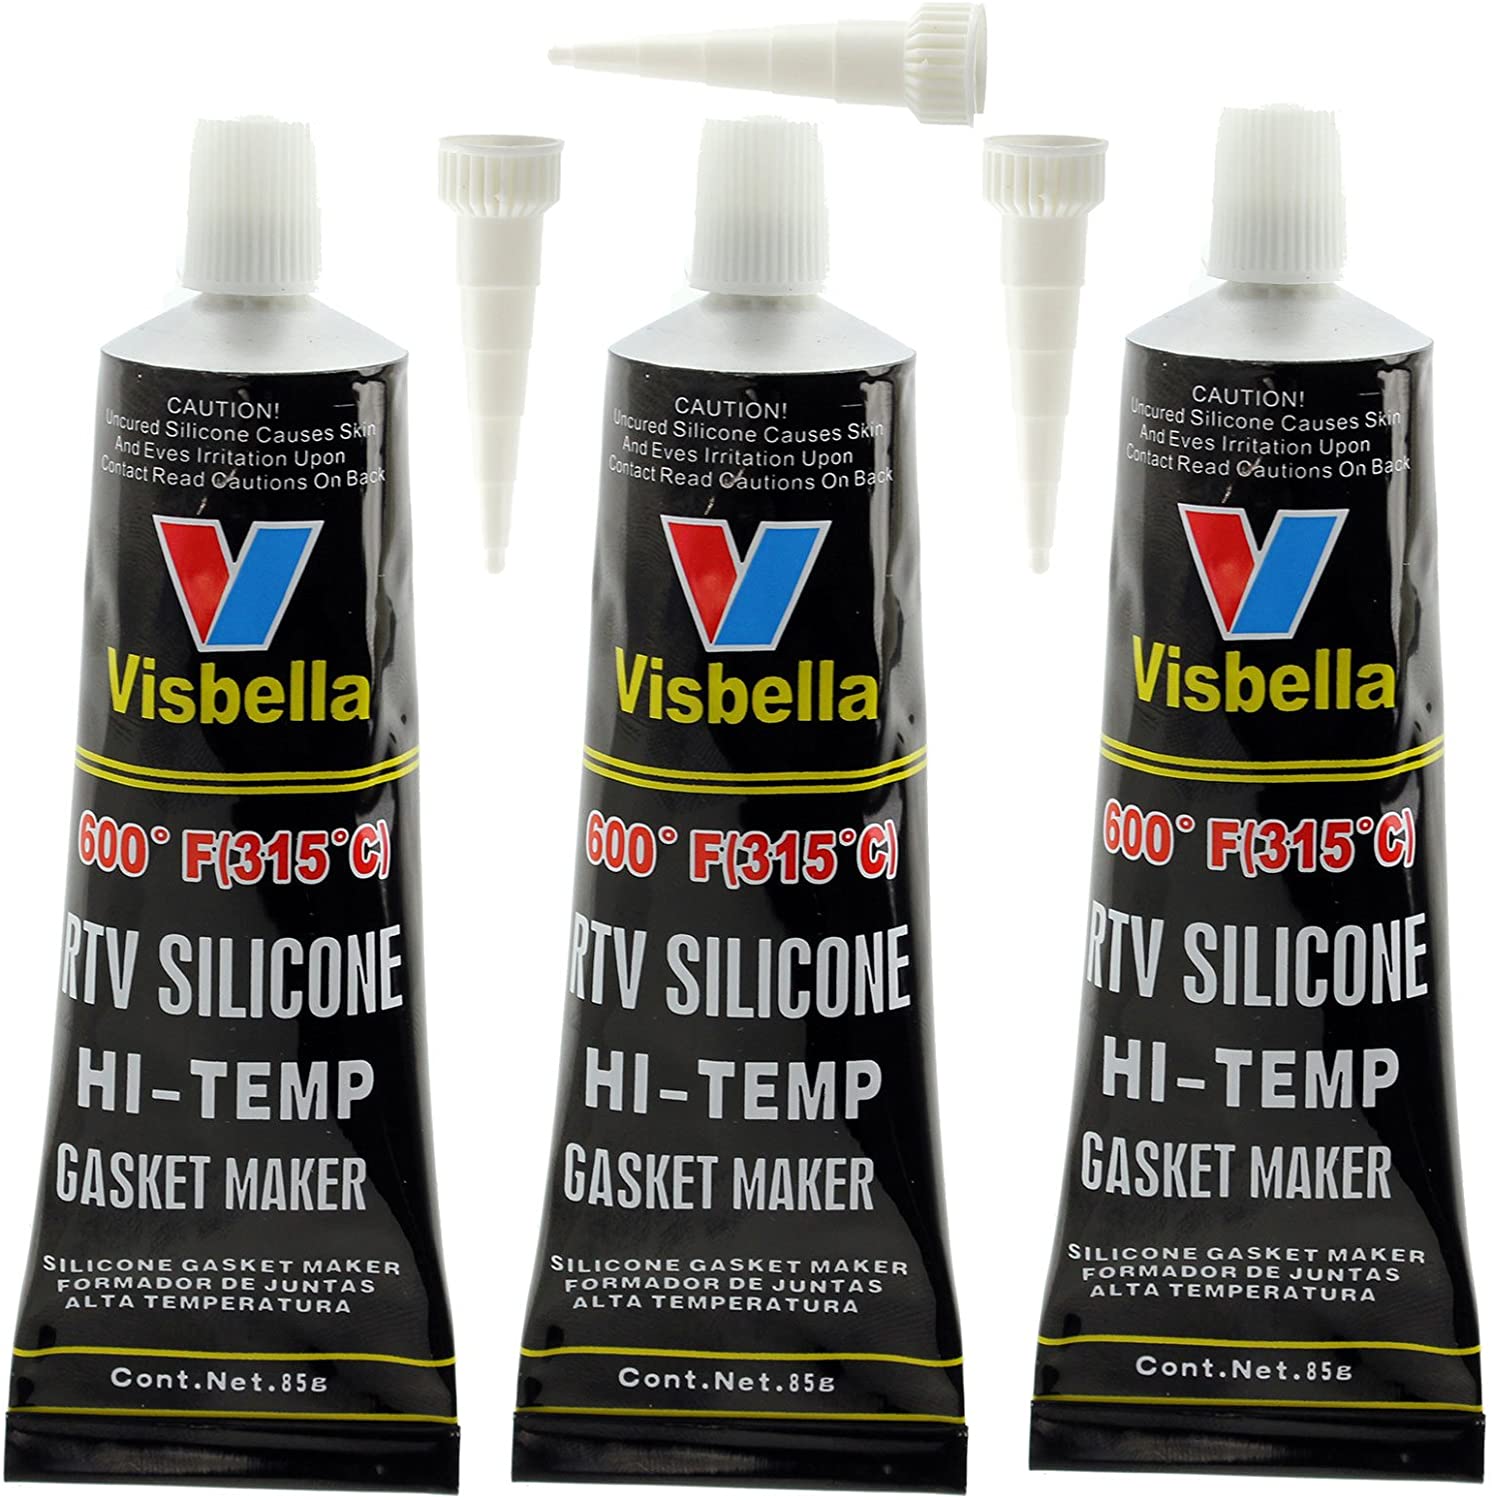 Visbella Silicone Engine Repair Gasket Seal Maker High Temperature Heat Resistant from -80ºF to 600ºF (Black, Pack of 3)